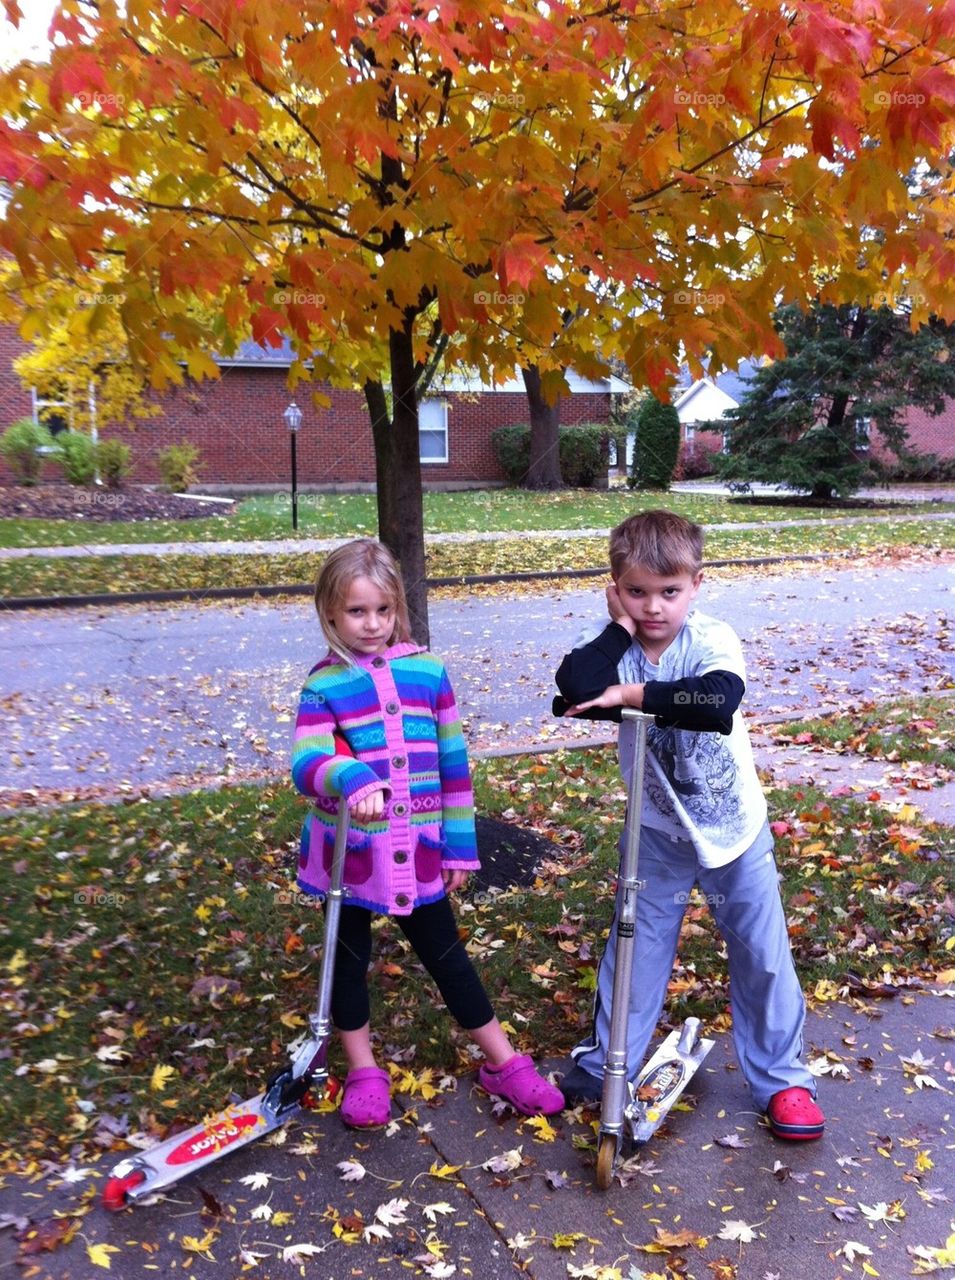 Kids posing on scooters